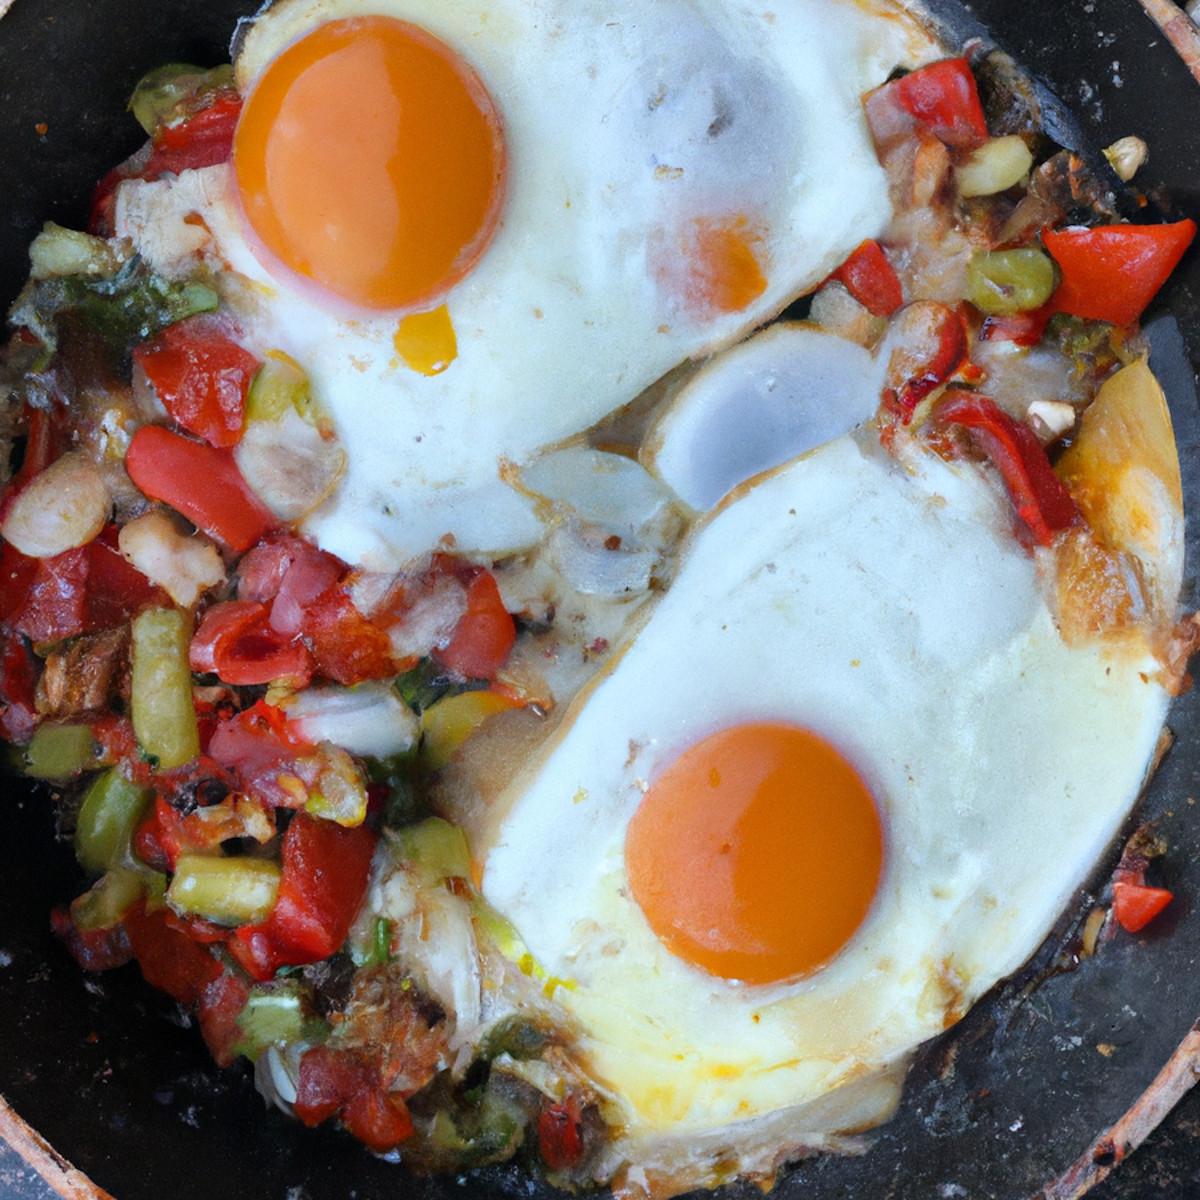 One-pan eggs and veggies brunch